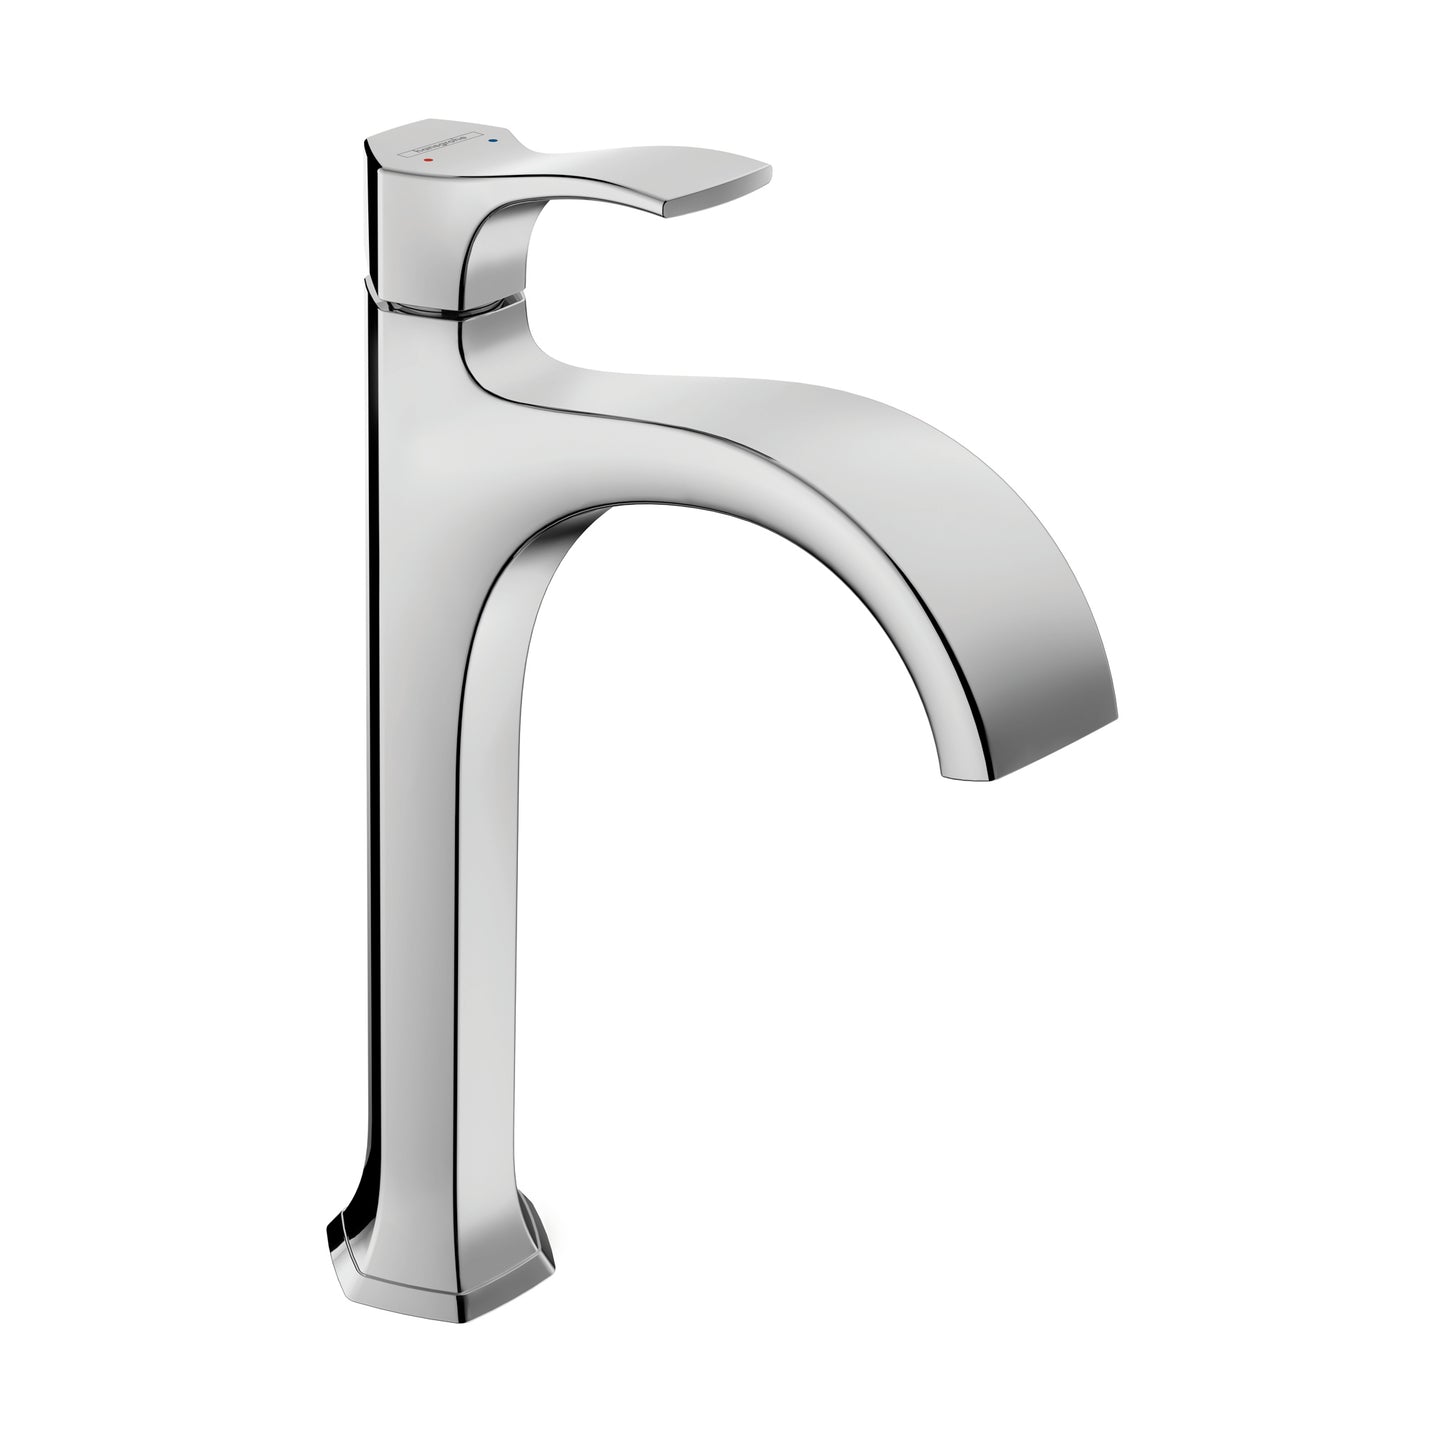 HANSGROHE 04811000 Chrome Locarno Transitional Single Hole Bathroom Faucet 1.2 GPM